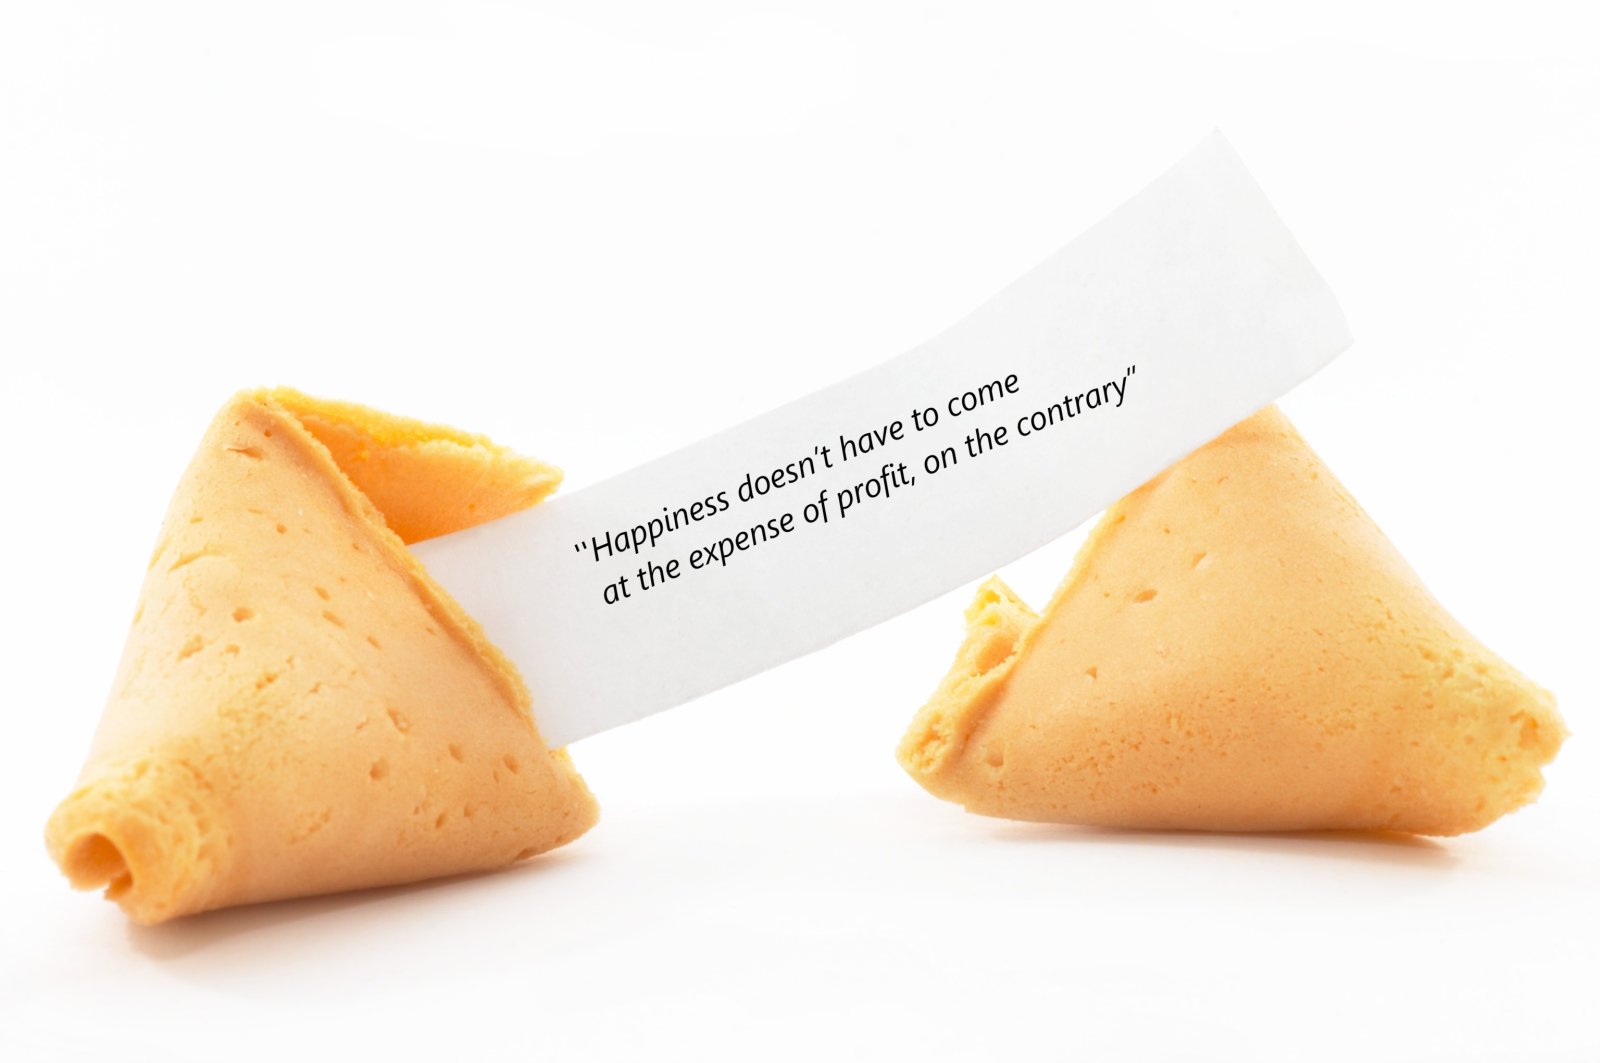 Fortune cookie with the inscription "Happiness doesn’t have to come at the expense of profit, on the contrary"